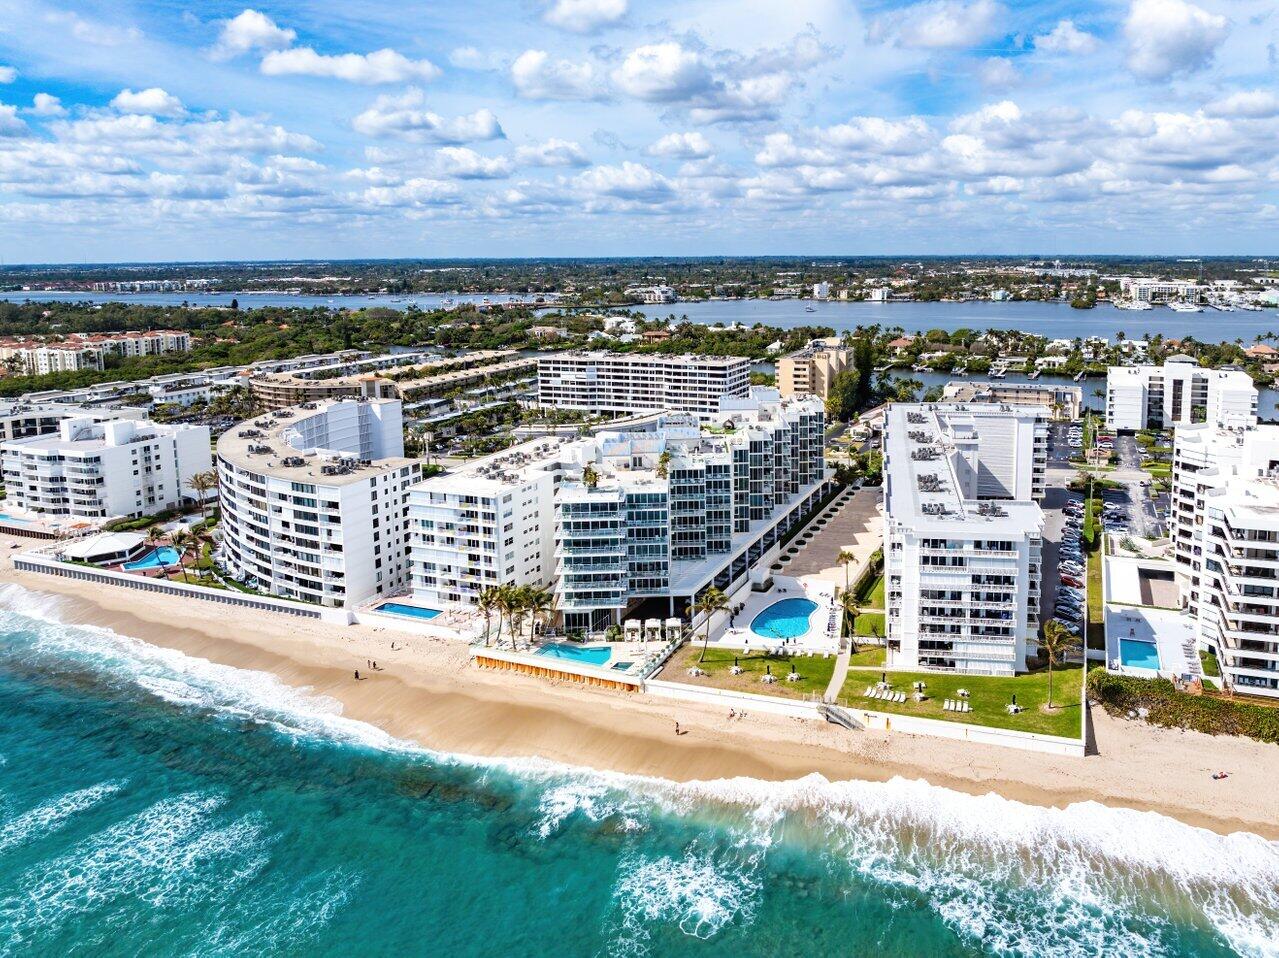 Welcome home to 3550 South Ocean, Palm Beach's newest luxury, gated beachfront building featuring just 30 residences. This professionally-designed 2 bed + enclosed den/3.1 bath residence features a private elevator entry & is being sold fully-furnished with curated pieces by Roche Bobois & custom build-outs/closets. Floor-to-ceiling glass frames an array of stunning ocean views from the living area & primary bedroom suite, while the expansive, light-filled open plan portrays white oak wood-plank flooring throughout. Designed by Champalimaud, the chef-caliber Molteni kitchen is a stand-out, replete w/genuine marble countertops & entertaining island, Fantini fixtures & Miele appliances including a natural gas stovetop & wine refrigerator. The living area features double glass sliders >>more leading to your private balcony. The split-plan layout features a primary bedroom suite w/balcony access, a spa-worthy bathroom wrapped in stone w/dual floating vanities, deep-soaking tub, separate shower w/rainhead &amp; private water closet, two custom closets &amp; room darkening drapery. The guest suite offers an oversized luxe bathroom &amp; plentiful glass allowing natural light to fill the space. Your laundry room features Samsung washer &amp; dryer, built-in cabinetry, utility sink &amp; a tankless hot water heater. 

3550 South Ocean offers valet parking (two assigned parking spots), concierge services &amp; security. Just minutes north on A1A you'll find Worth Avenue w/all of its coveted shopping, dining, arts &amp; entertainment, culture &amp; social buzz. Top-rated golf courses, tennis clubs, private/public airports, marinas, private schools &amp; the award-winning Eau Palm Beach Resort &amp; Spa are all nearby. Pets welcome!